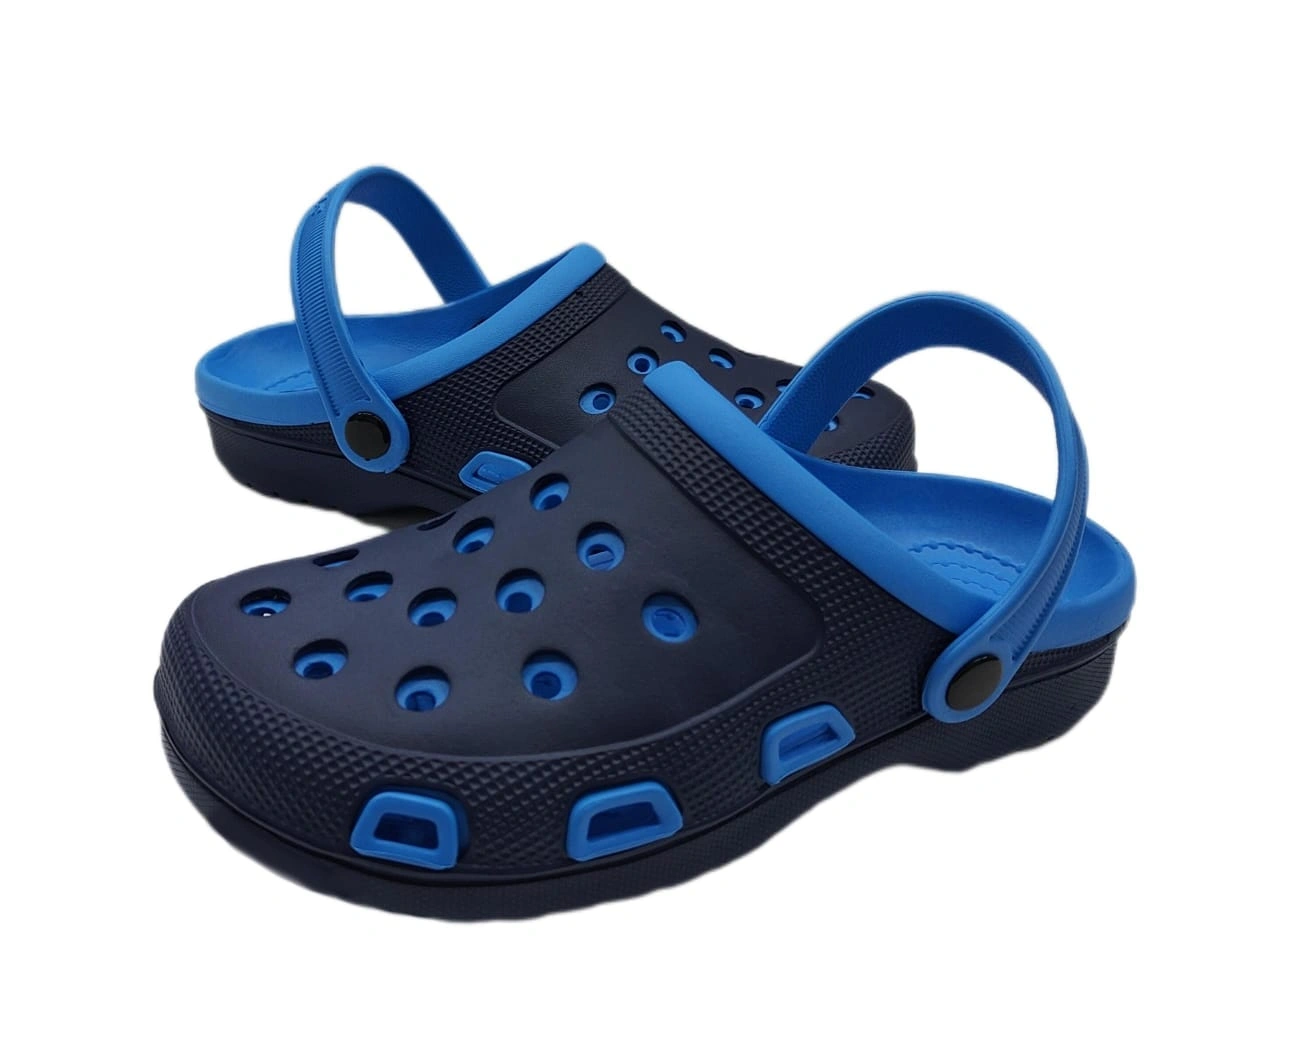 Clog Sandals for Men and Women: Comfortable, Lightweight Design with Durable Upper and Slip-Resistant Outsole for All-Day Wear-Blue-UK 10-2